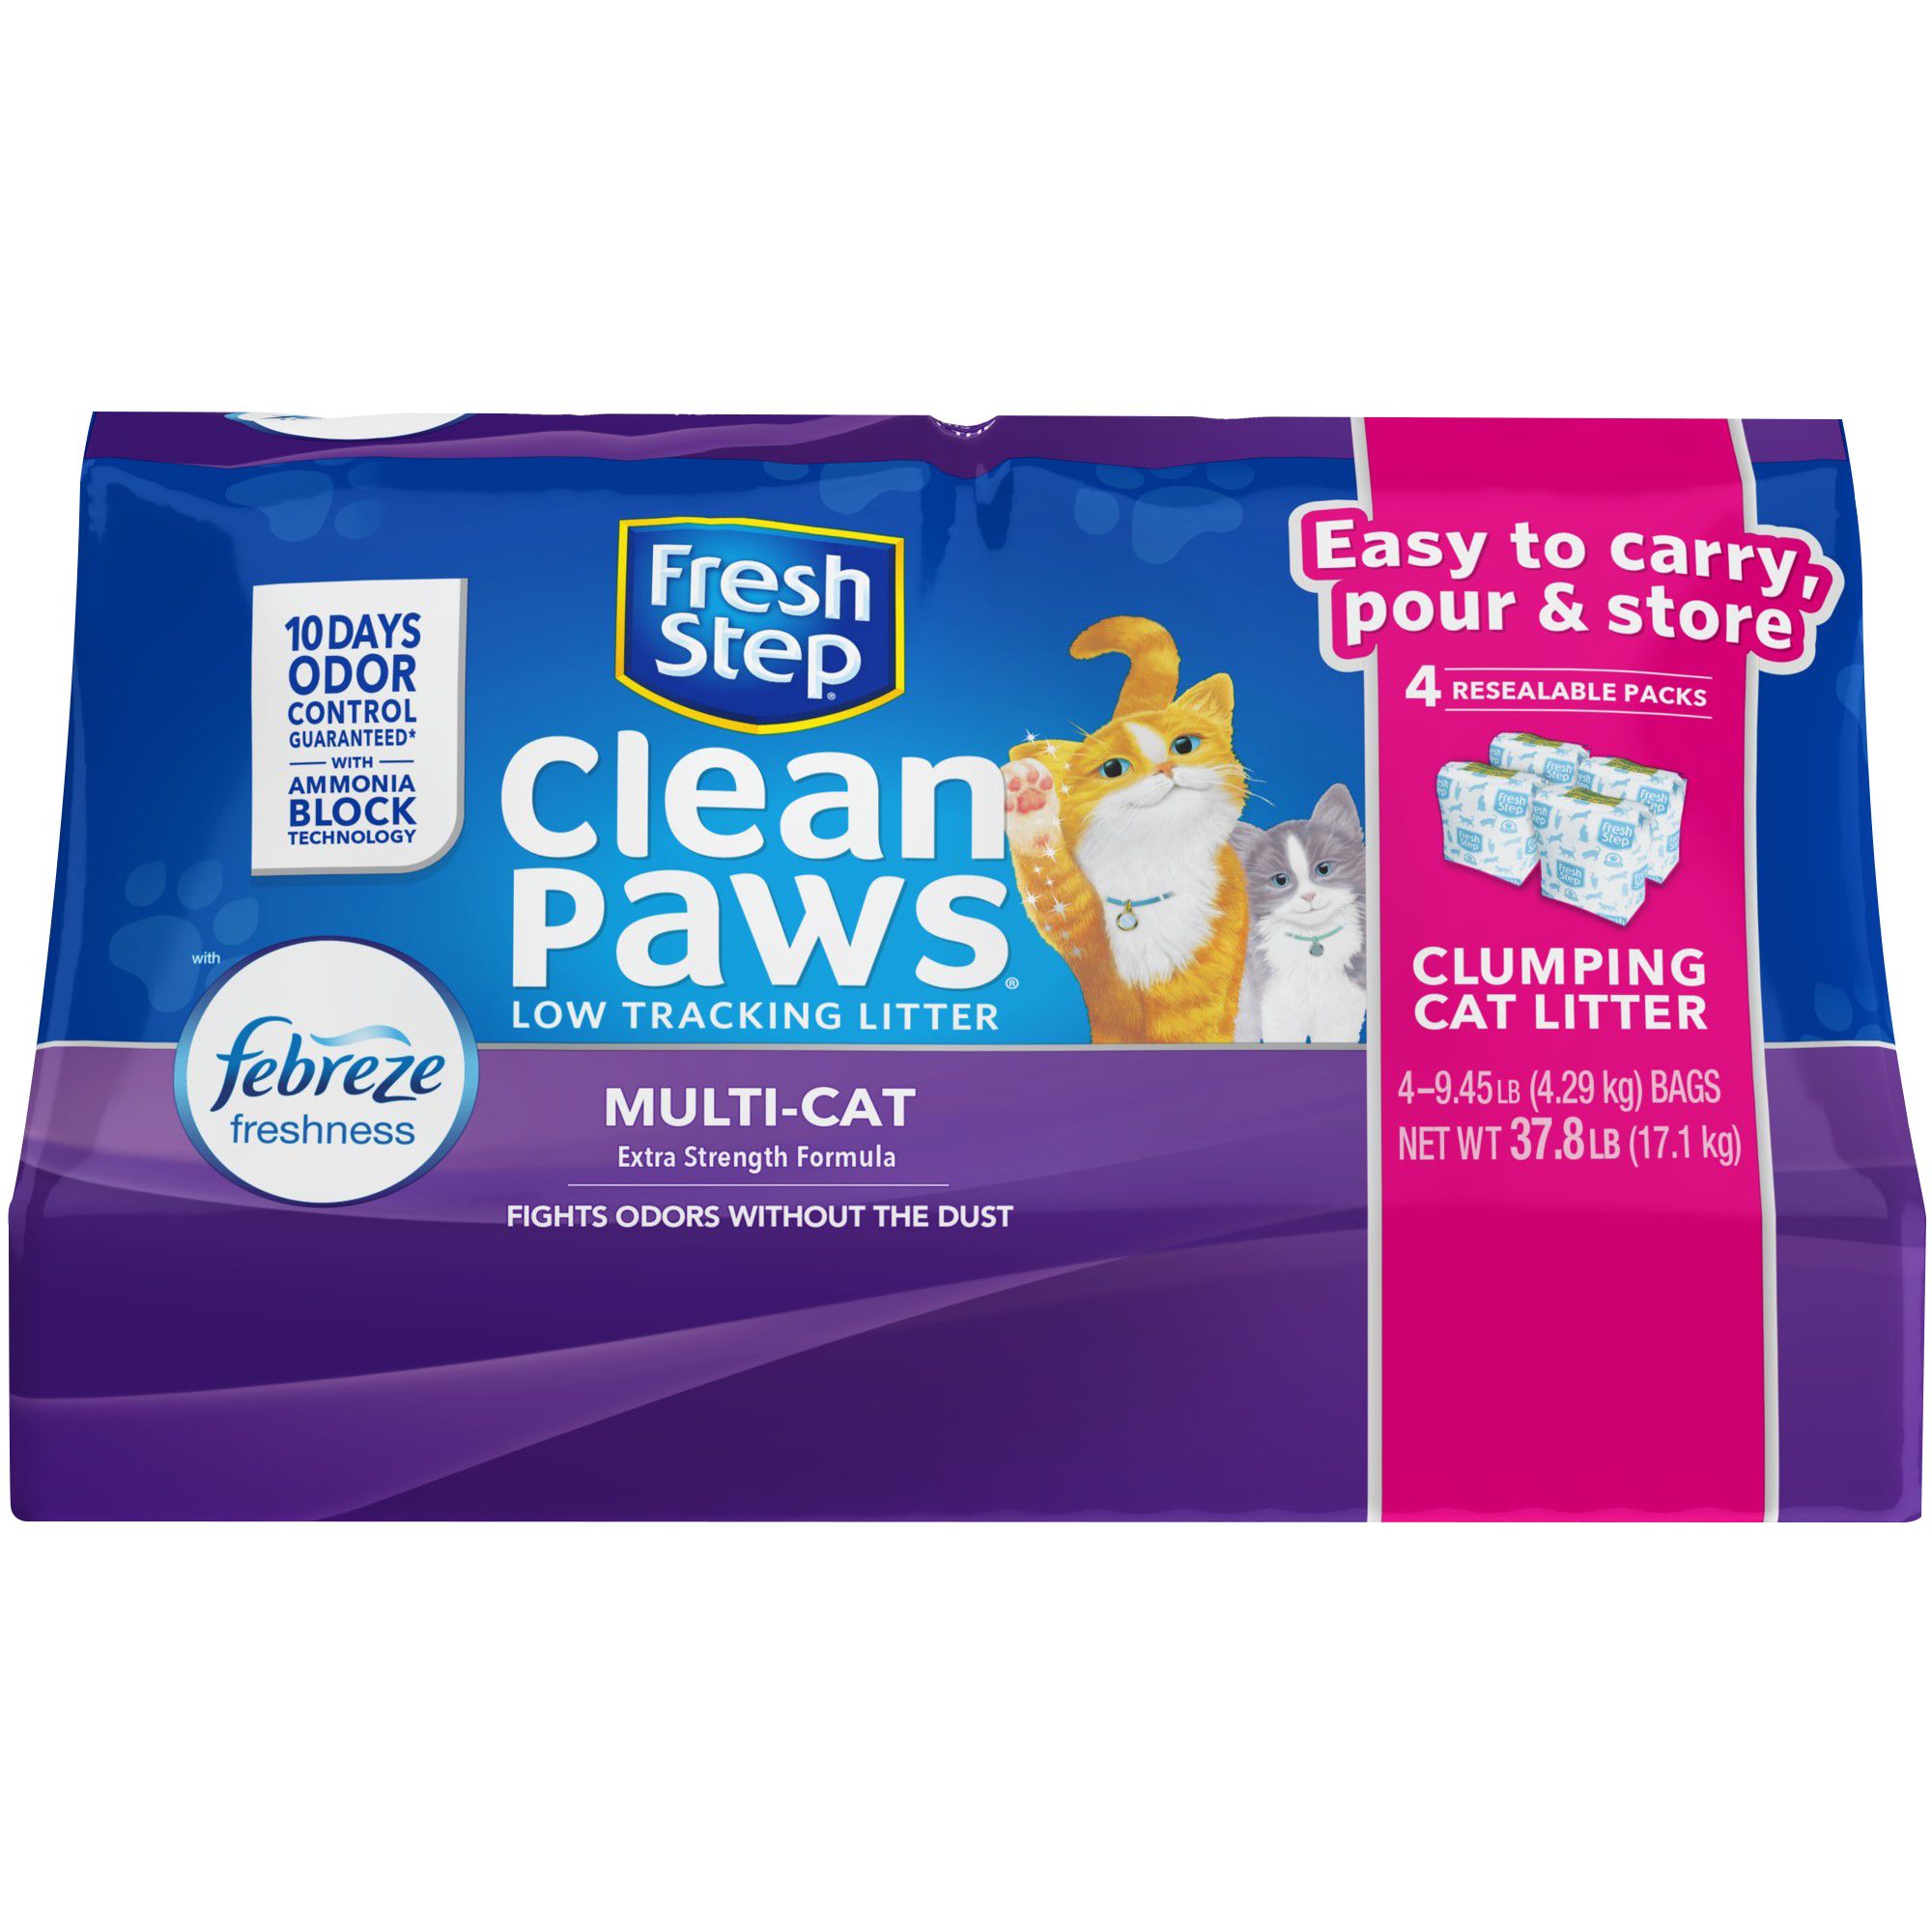 clean paws litter